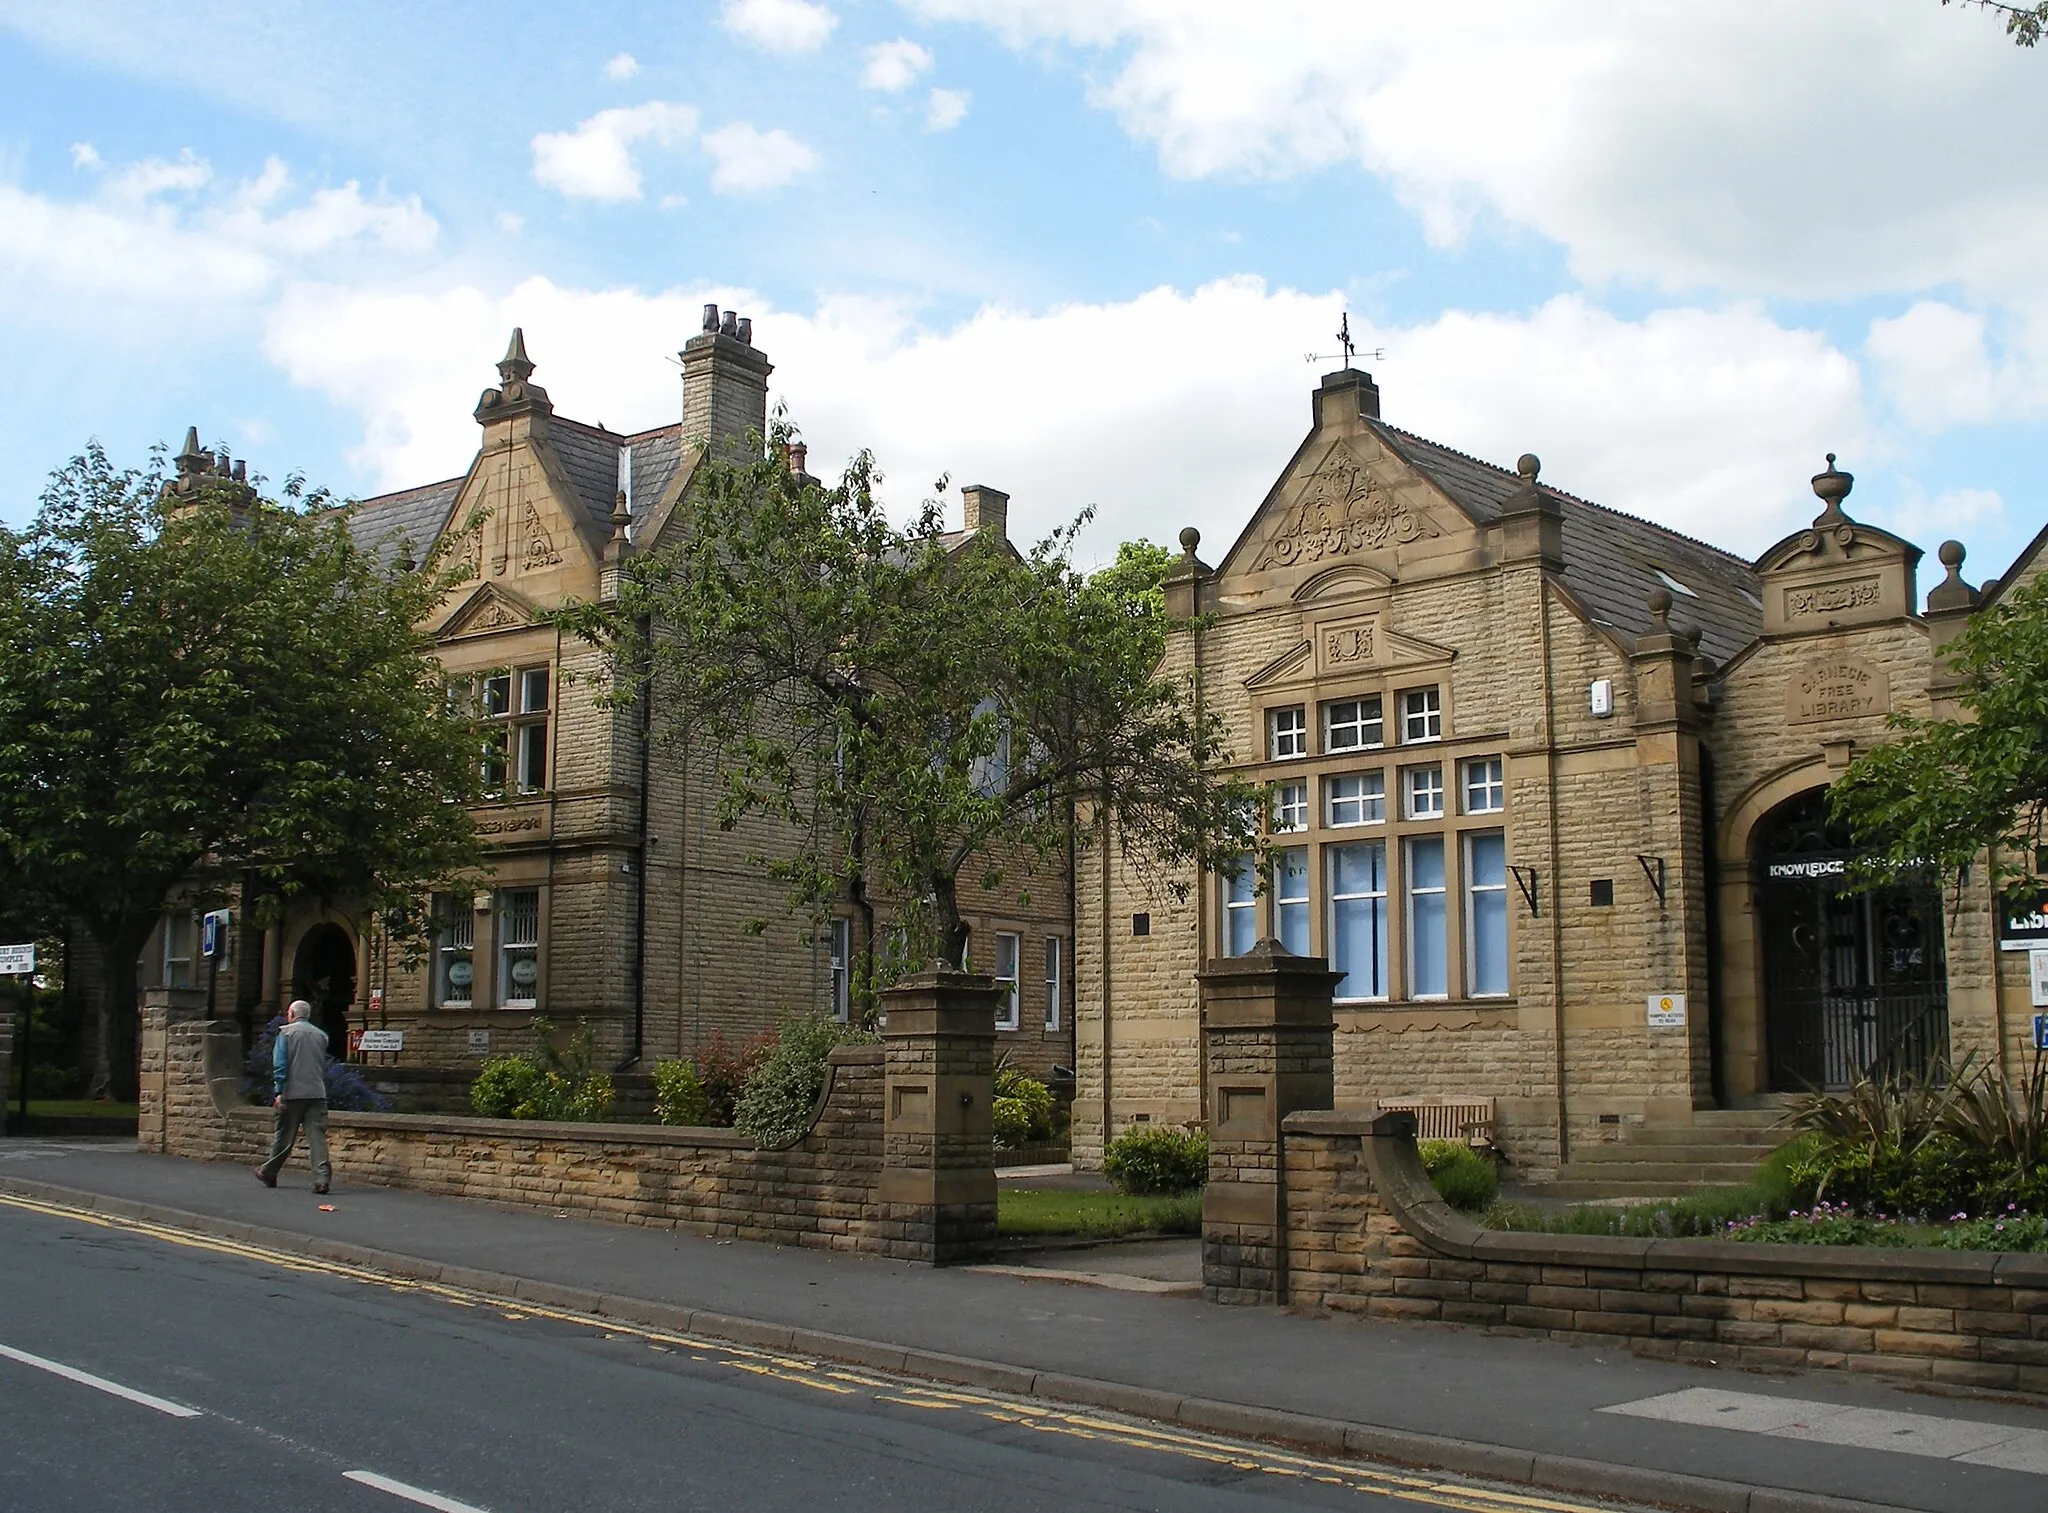 Photo showing: The old Town Hall (left) and Library at 21 Westfield Road, Horbury, Wakefield, West Yorkshire. Seen from grid reference SE291183 looking north.